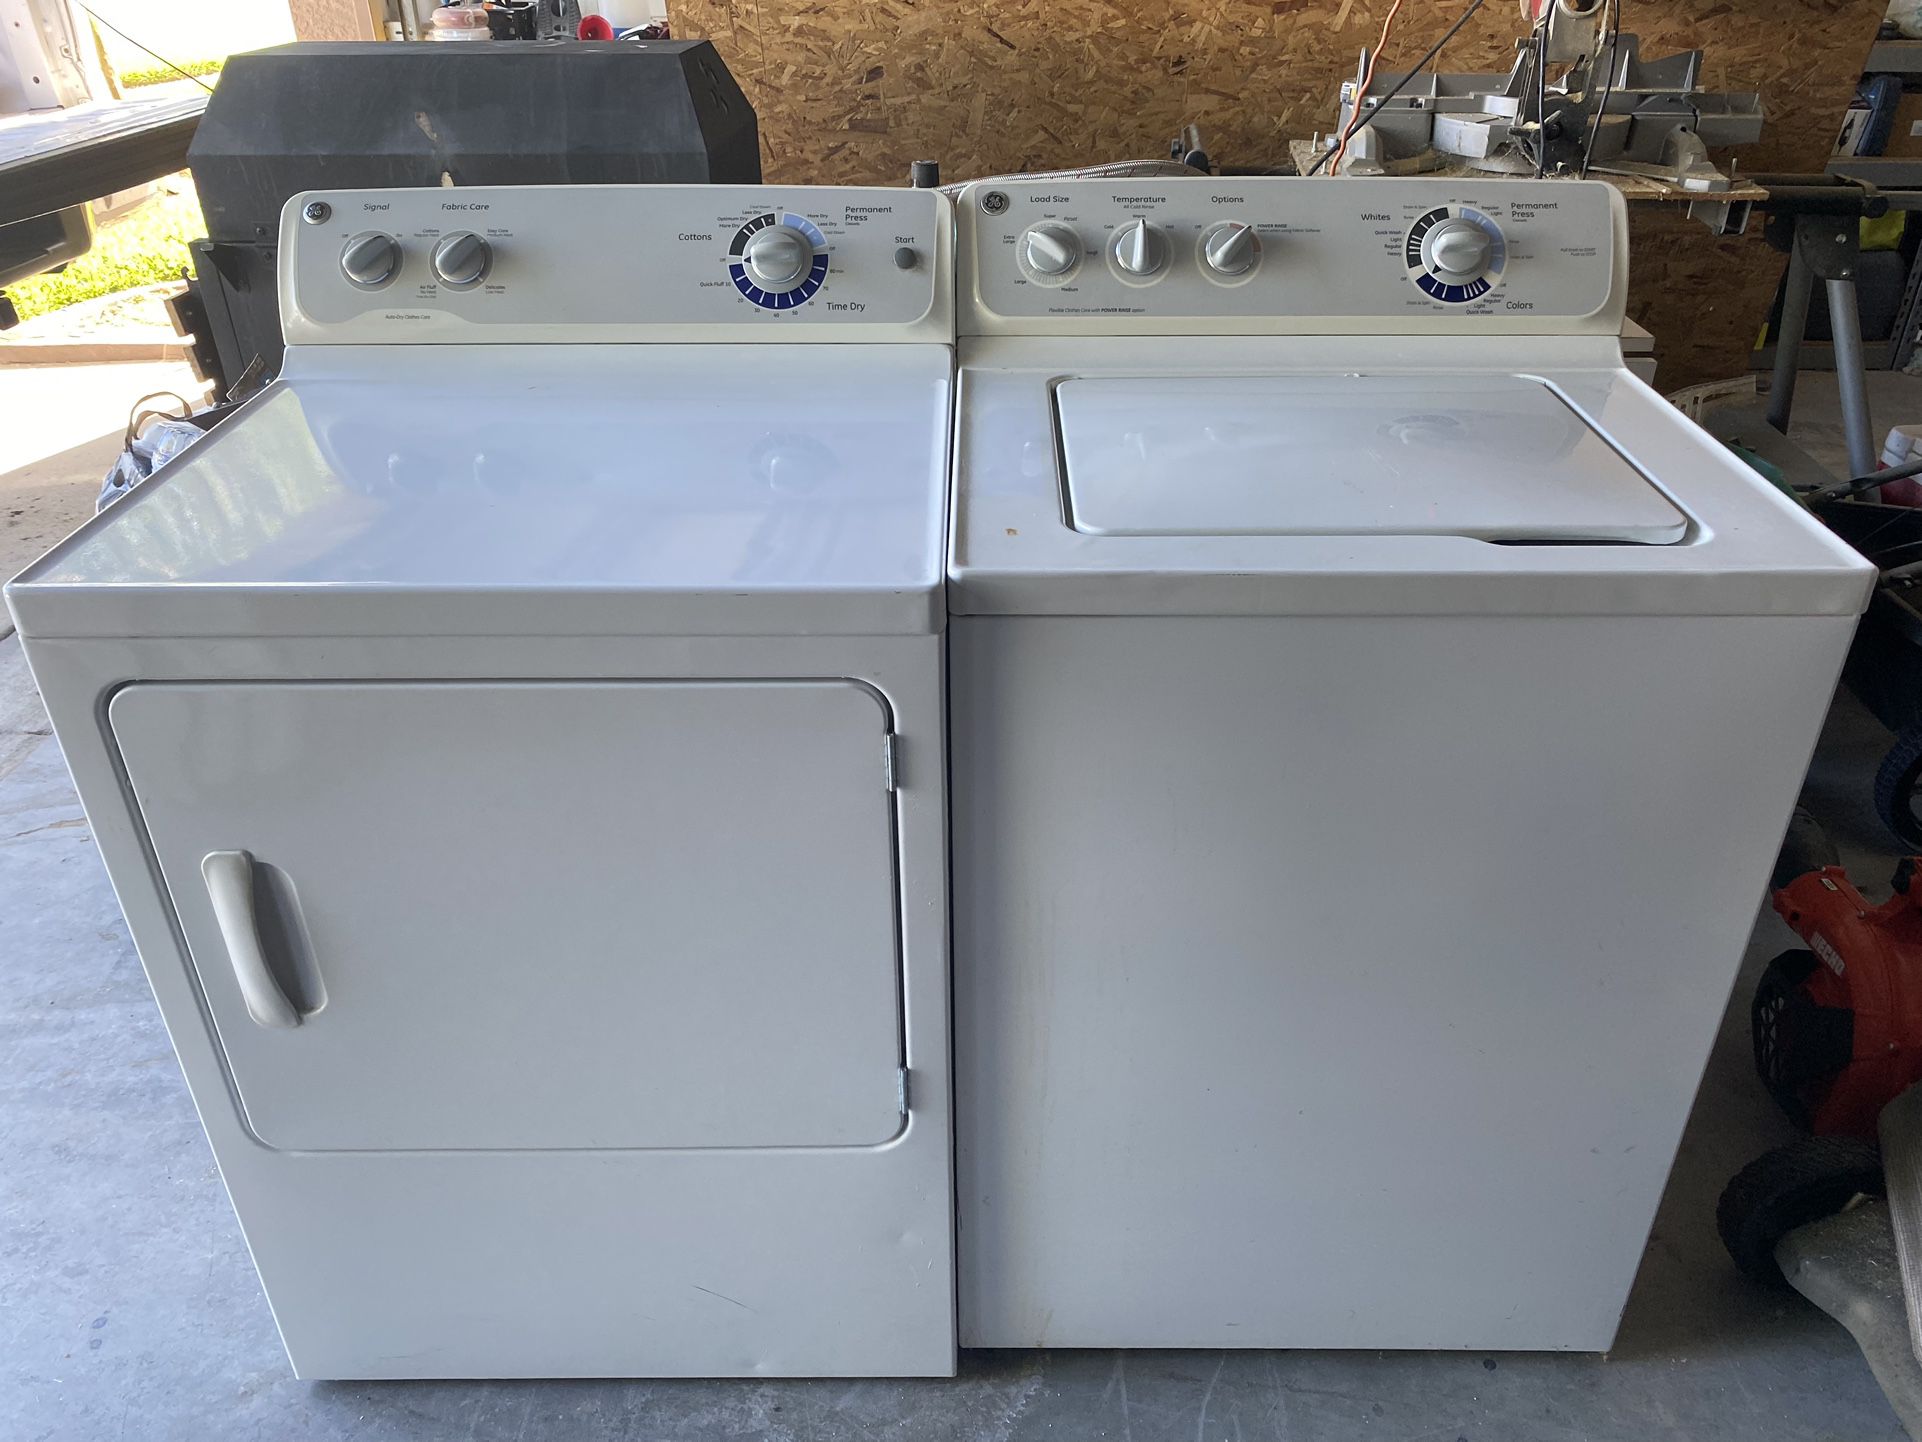 GE Used Washer And Dryer Set In Good Condition